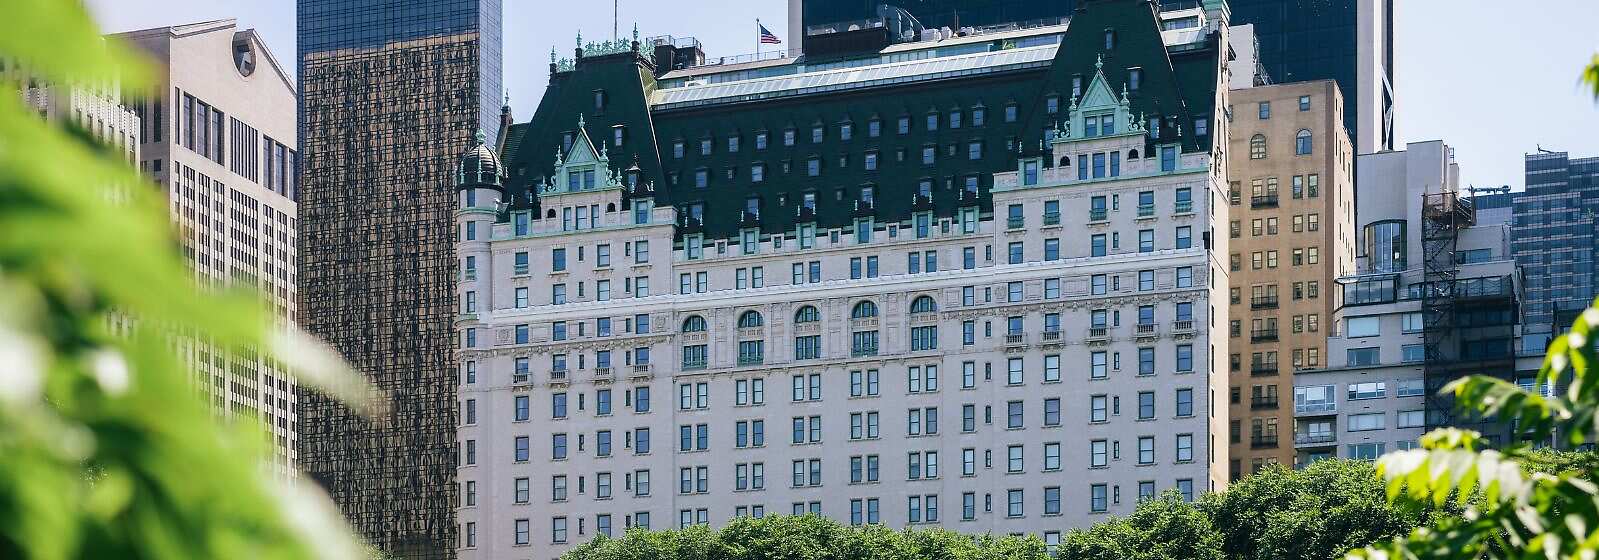 The Plaza Hotel as seen from Central Park 